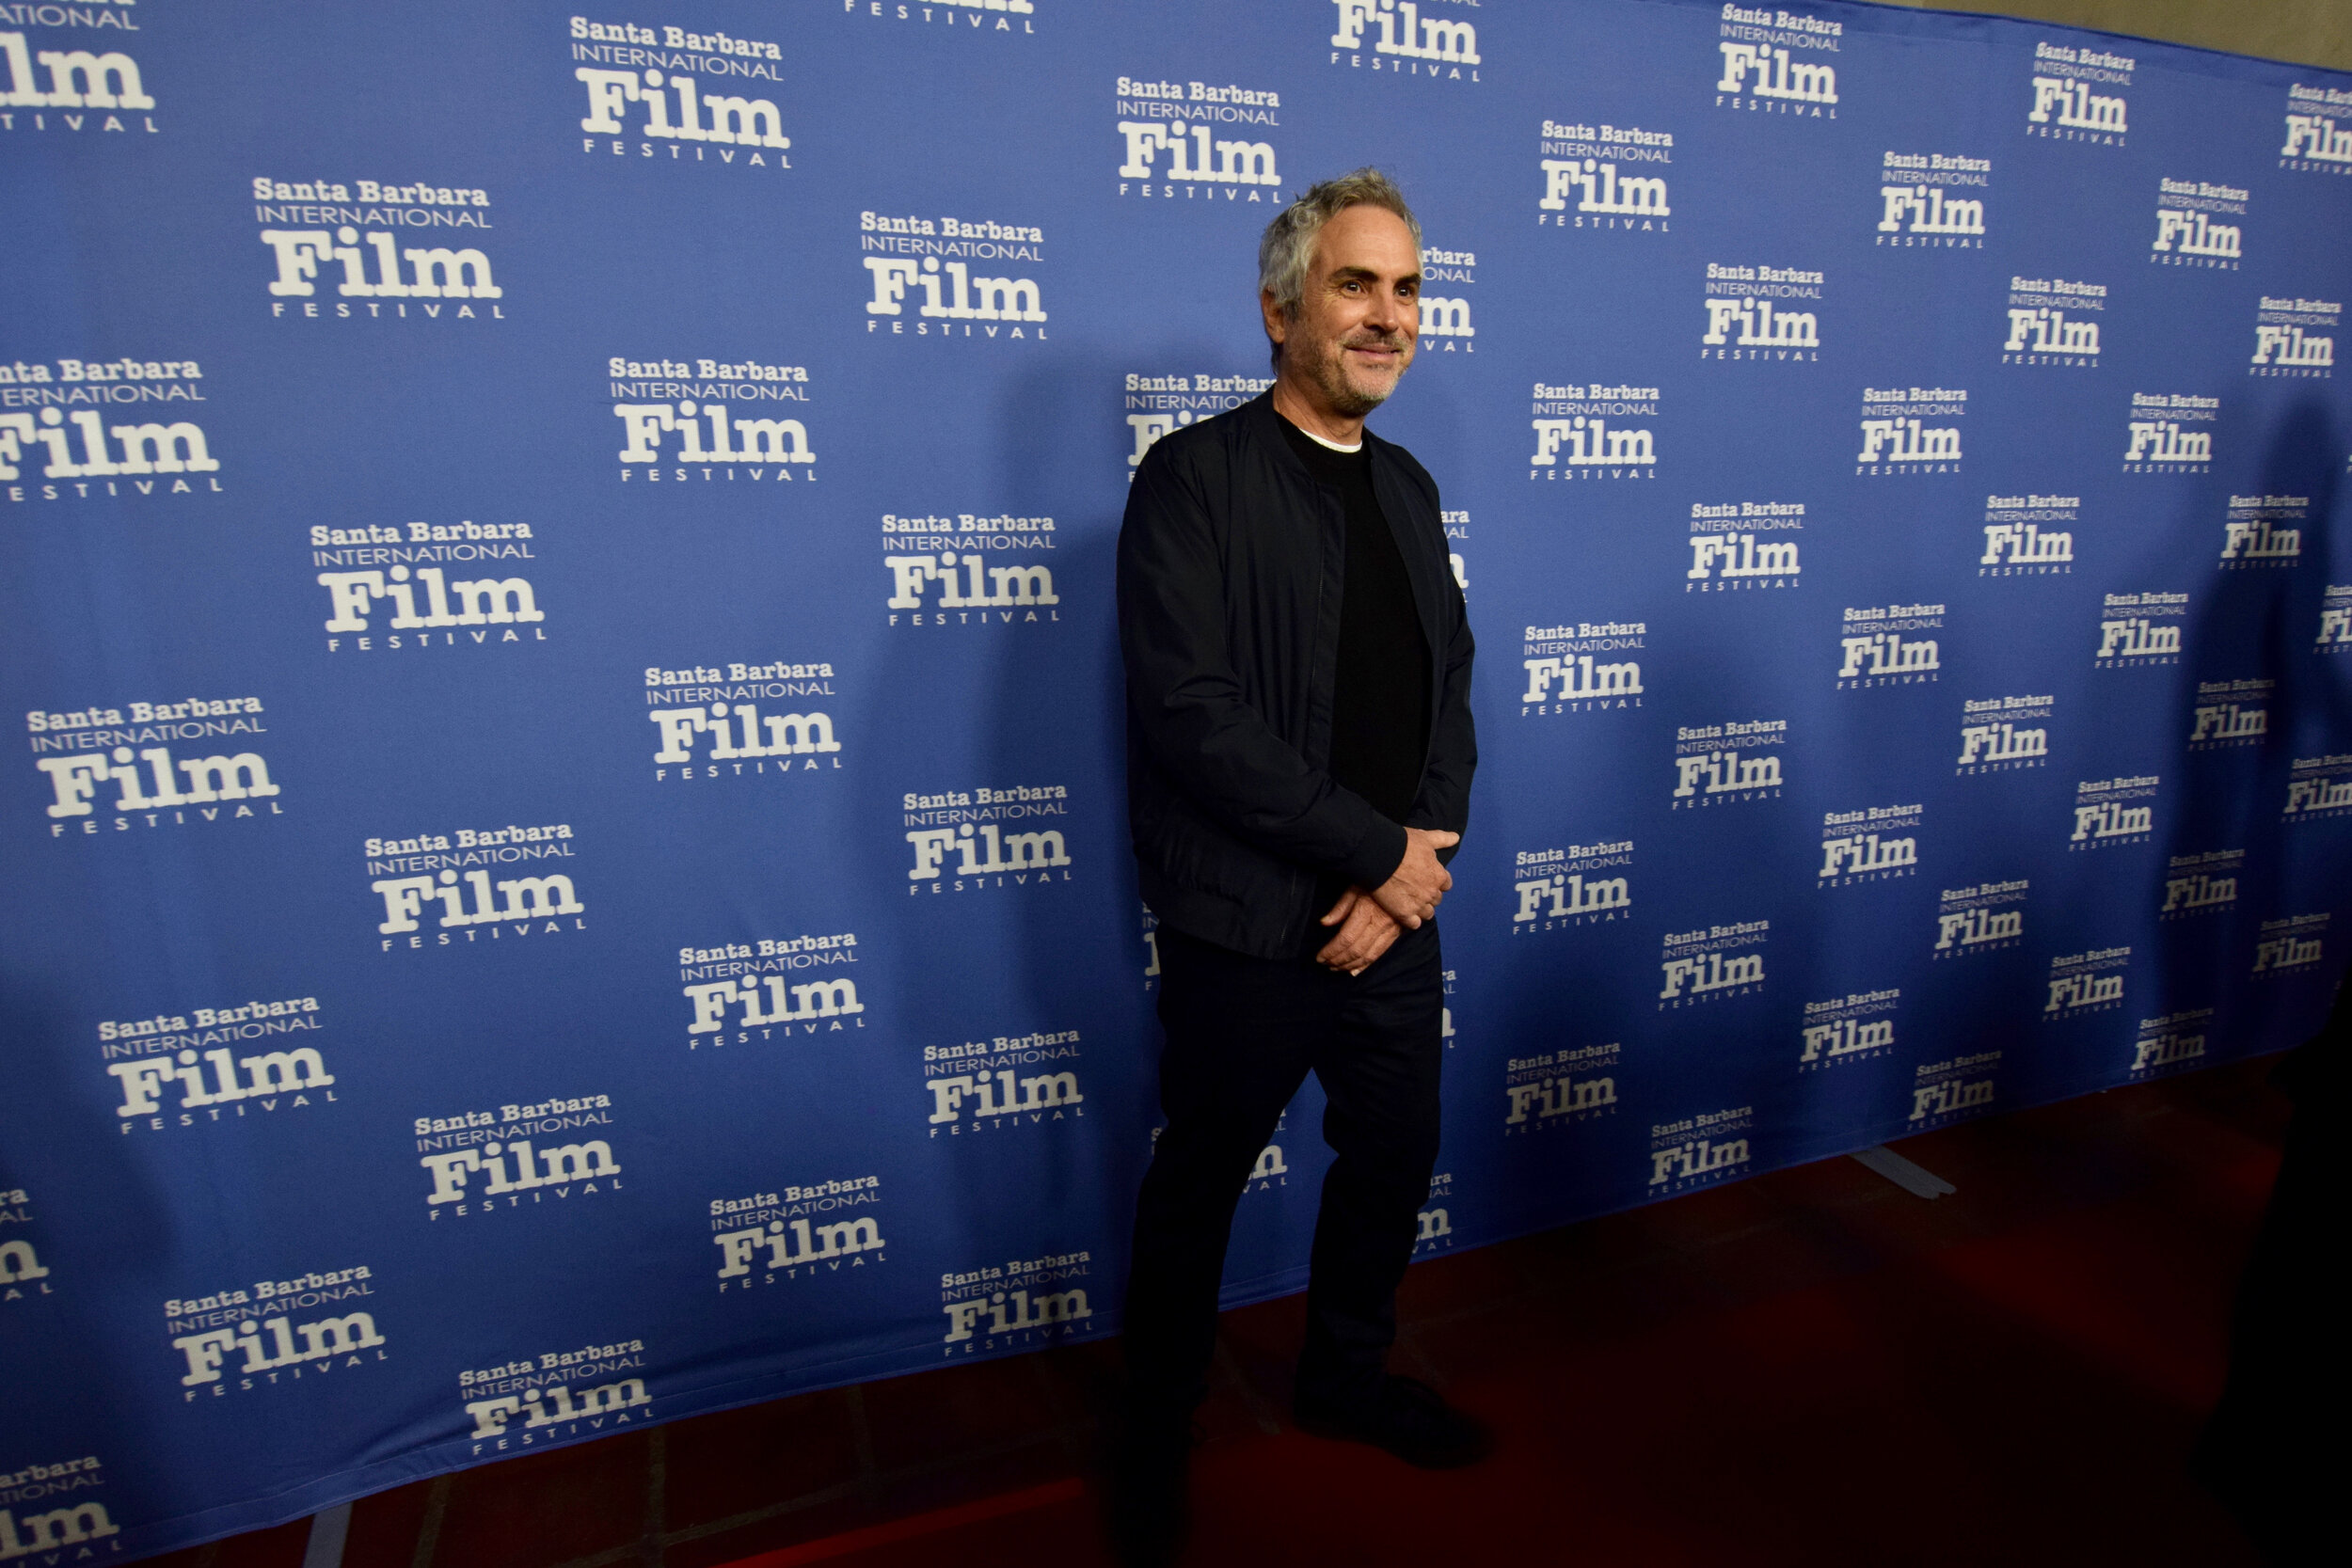  Alfonso Cuarón, Director of Roma, joins the 34th Santa Barbara International Film Festival for the Outstanding Directors Awards. 